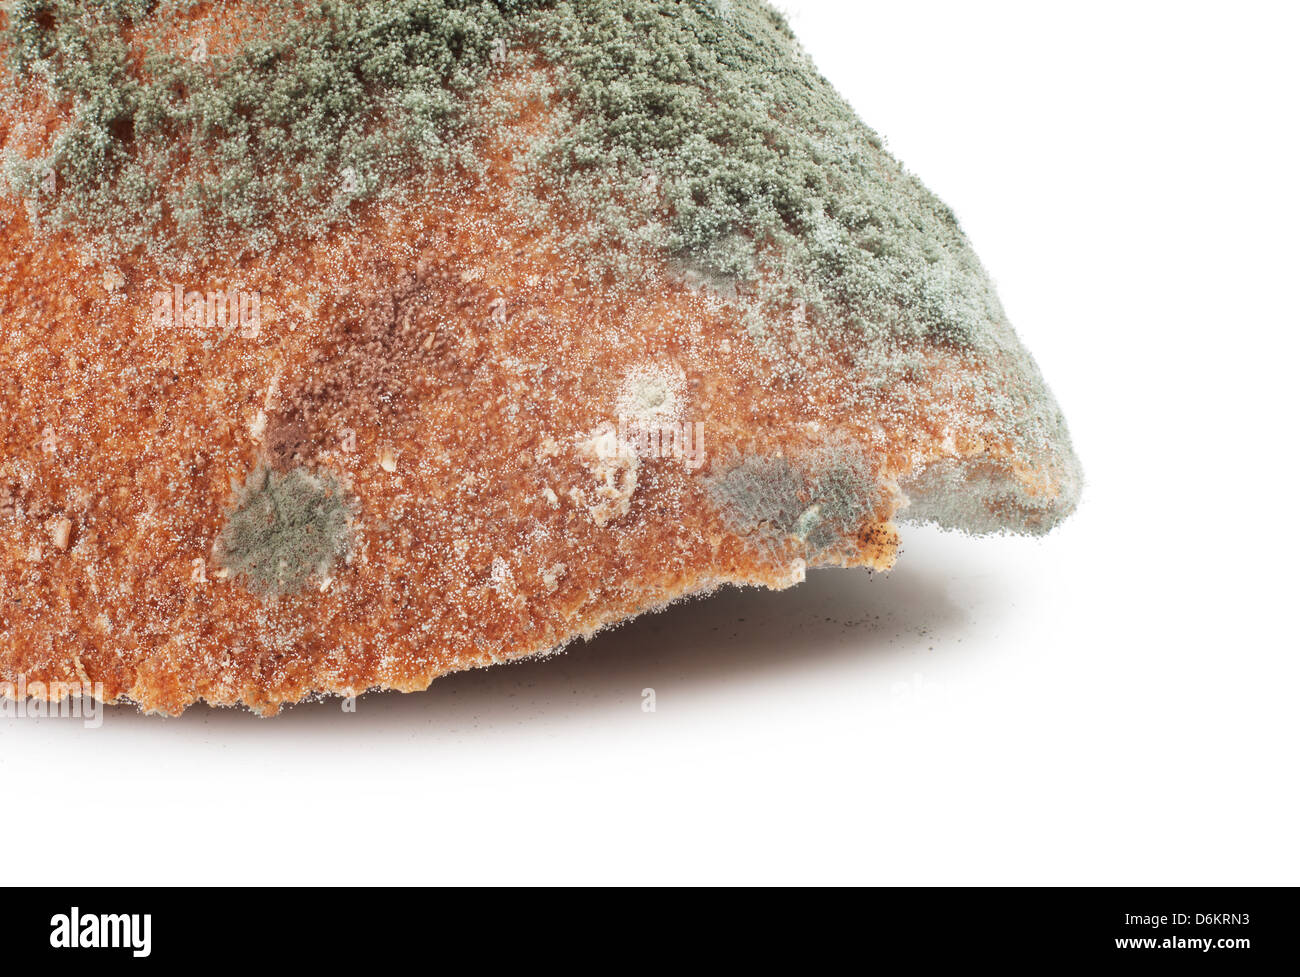 Mouldy bread, isolated on a white background Stock Photo